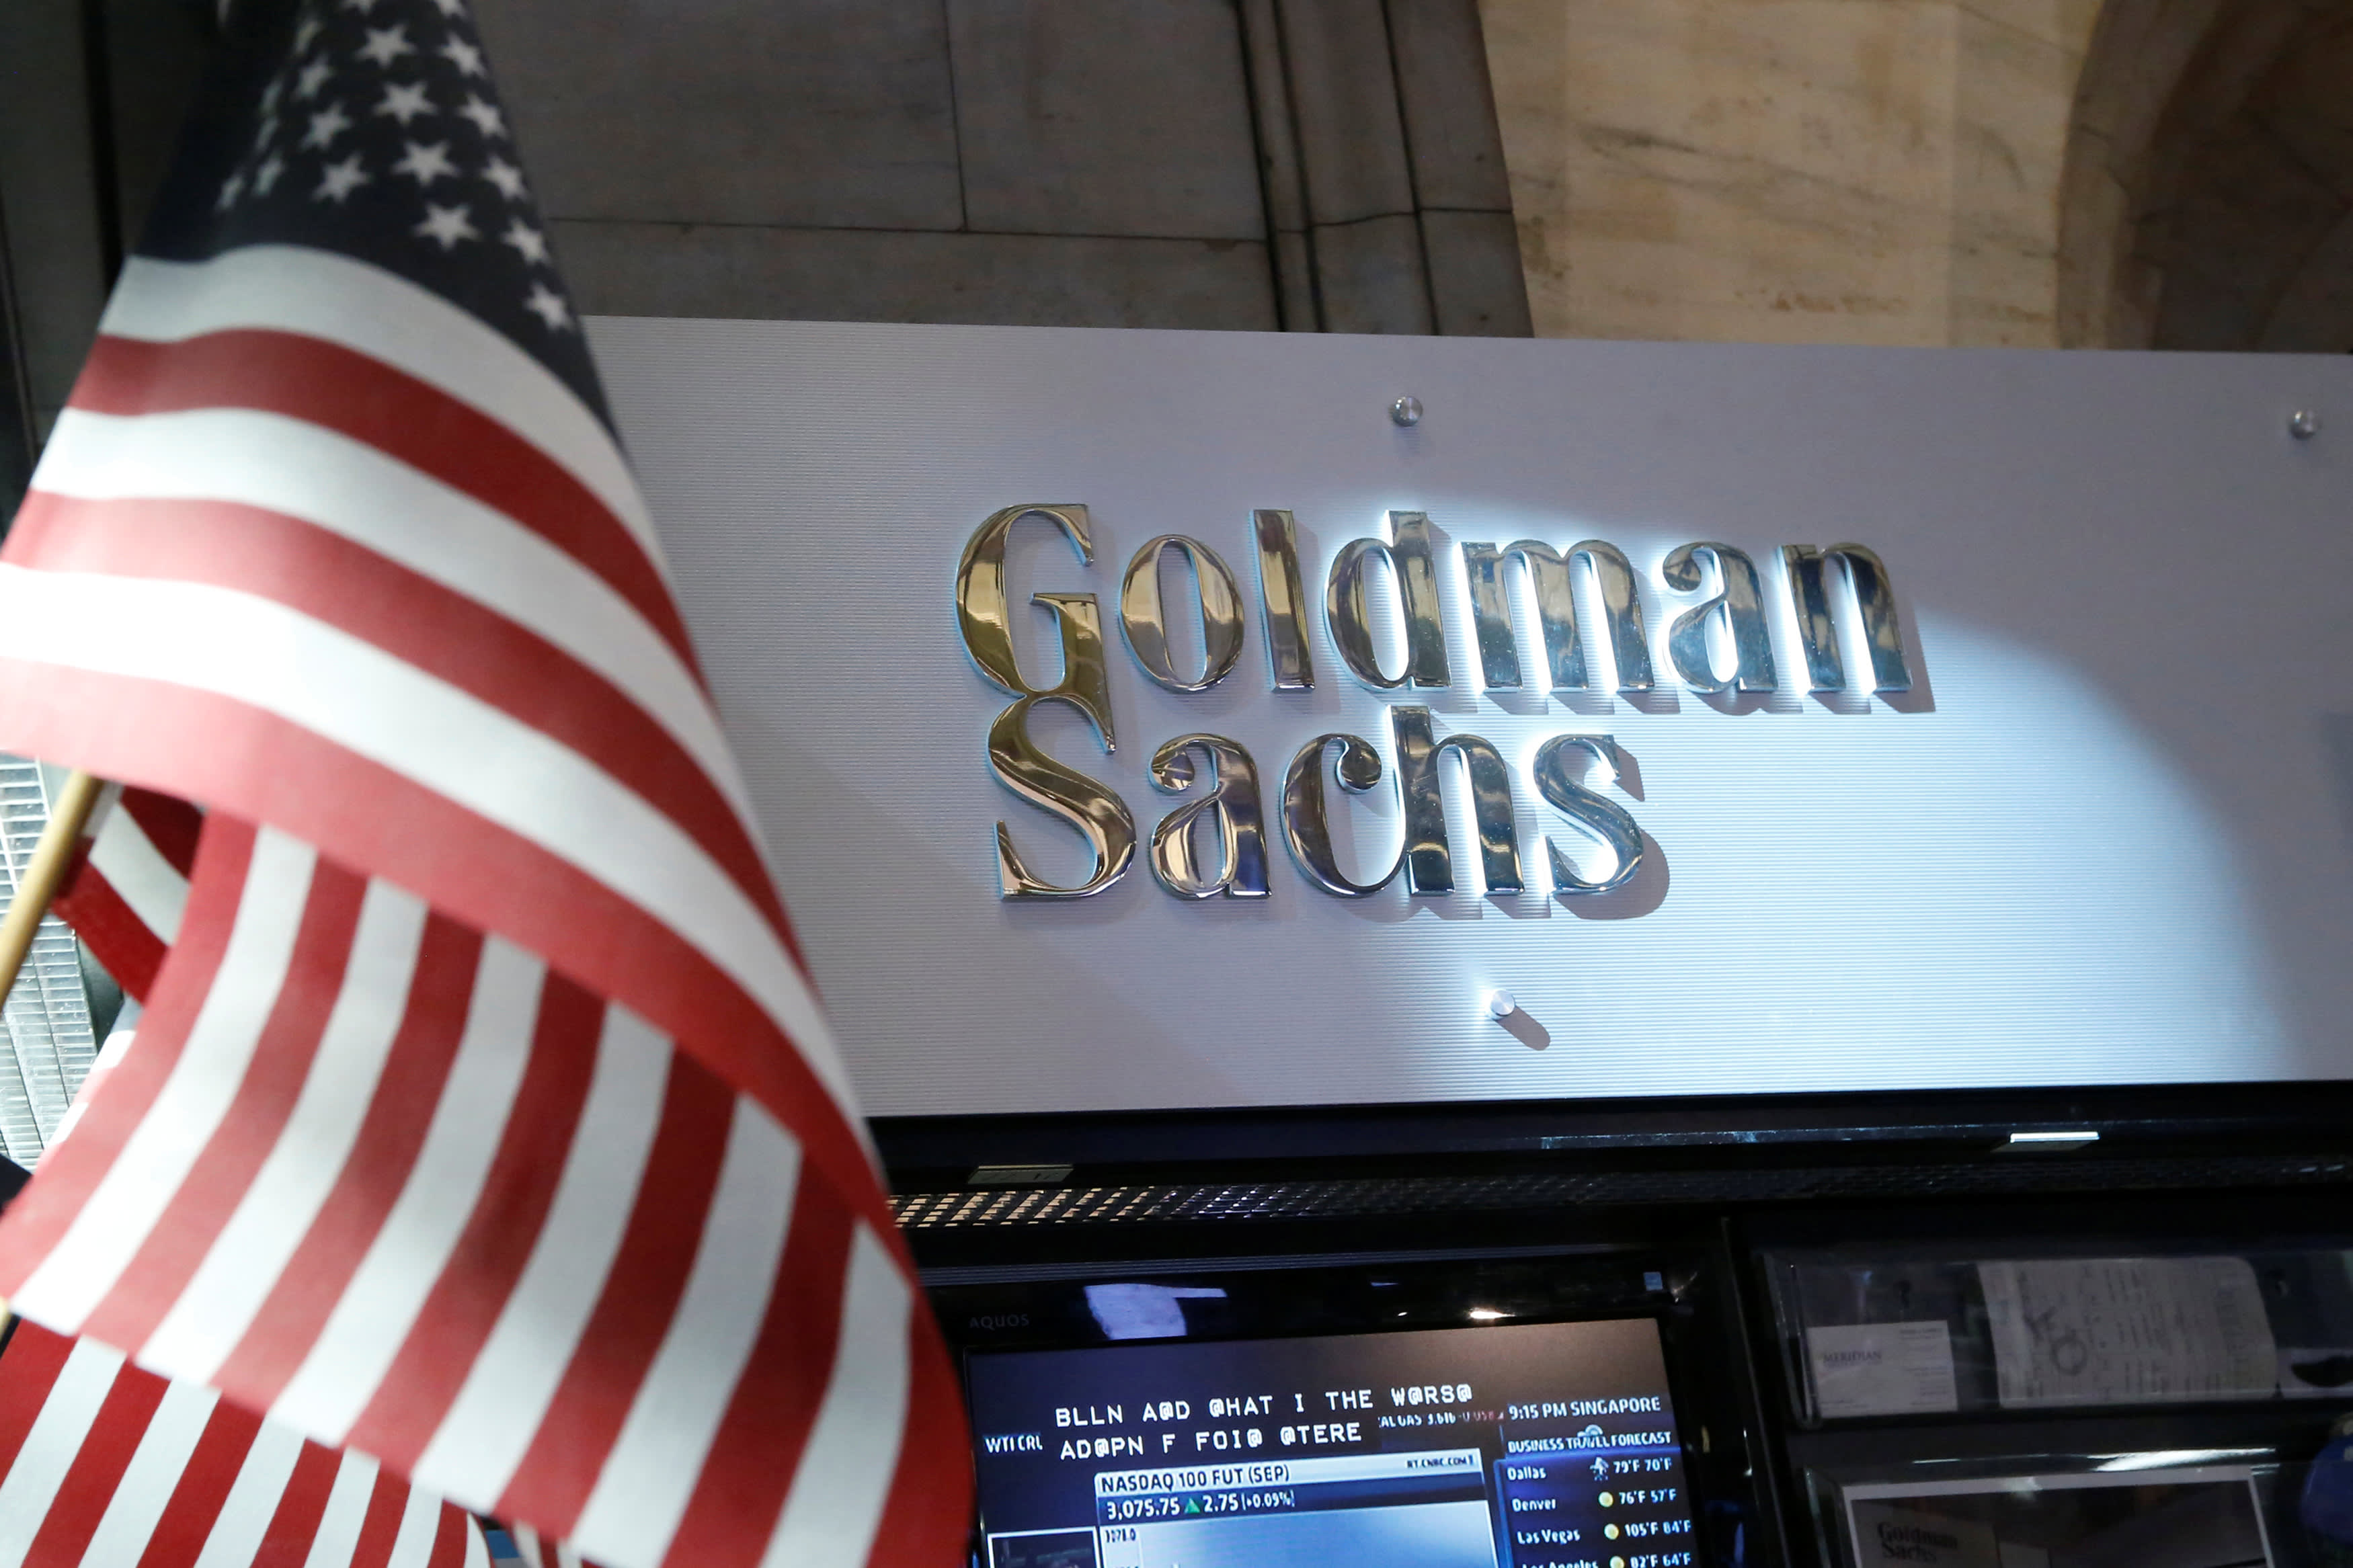 Wolfe Research downgrades Goldman Sachs, sees greater upside in other banks such as Wells Fargo